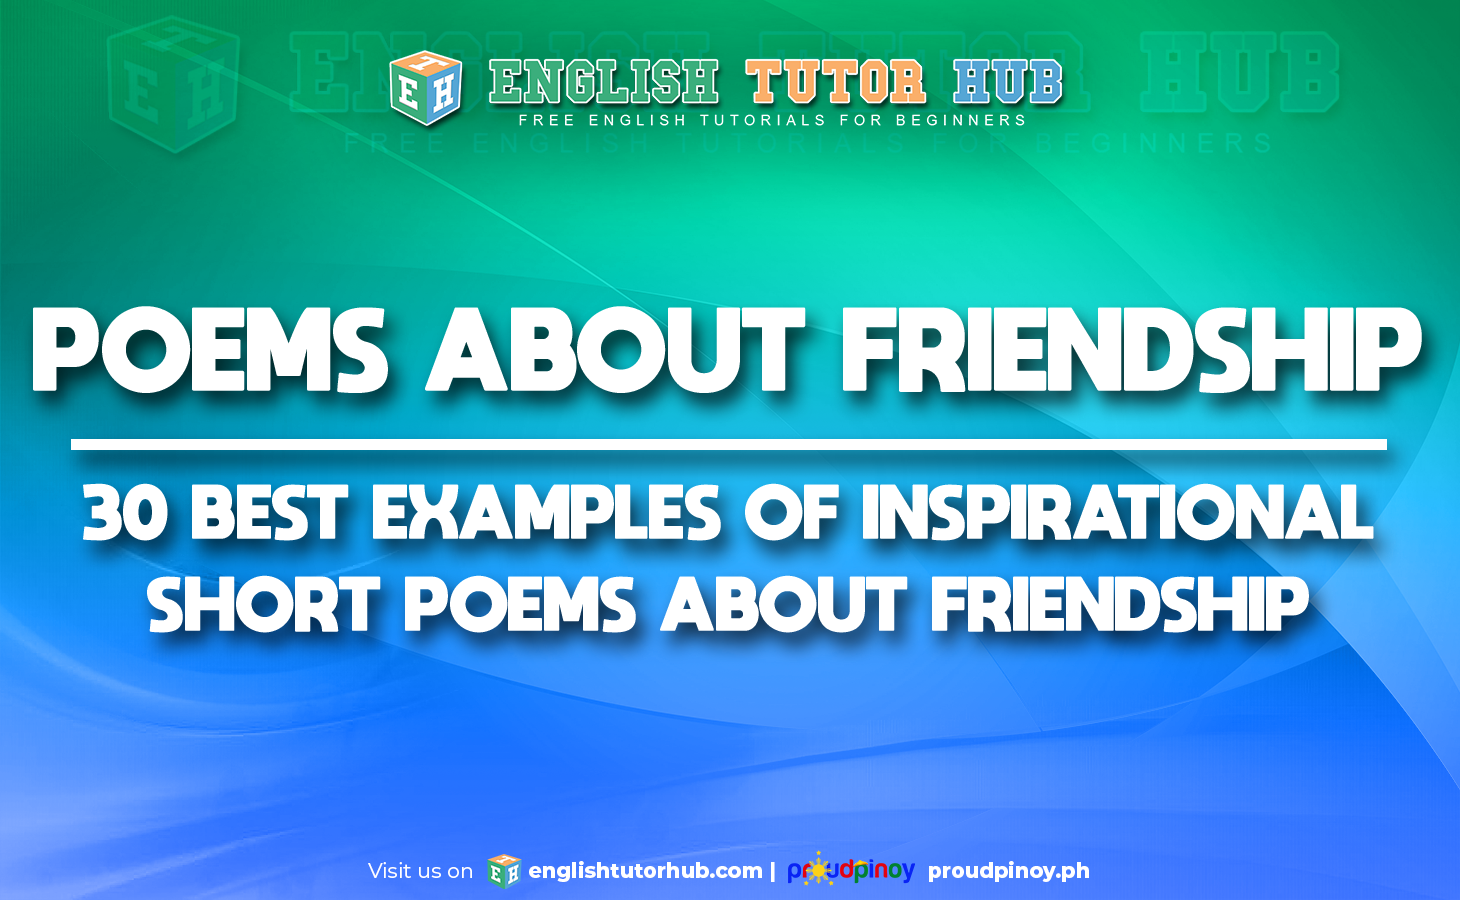 POEMS ABOUT FRIENDSHIP - 30 BEST EXAMPLES OF INSPIRATIONAL SHORT POEMS ABOUT FRIENDSHIP